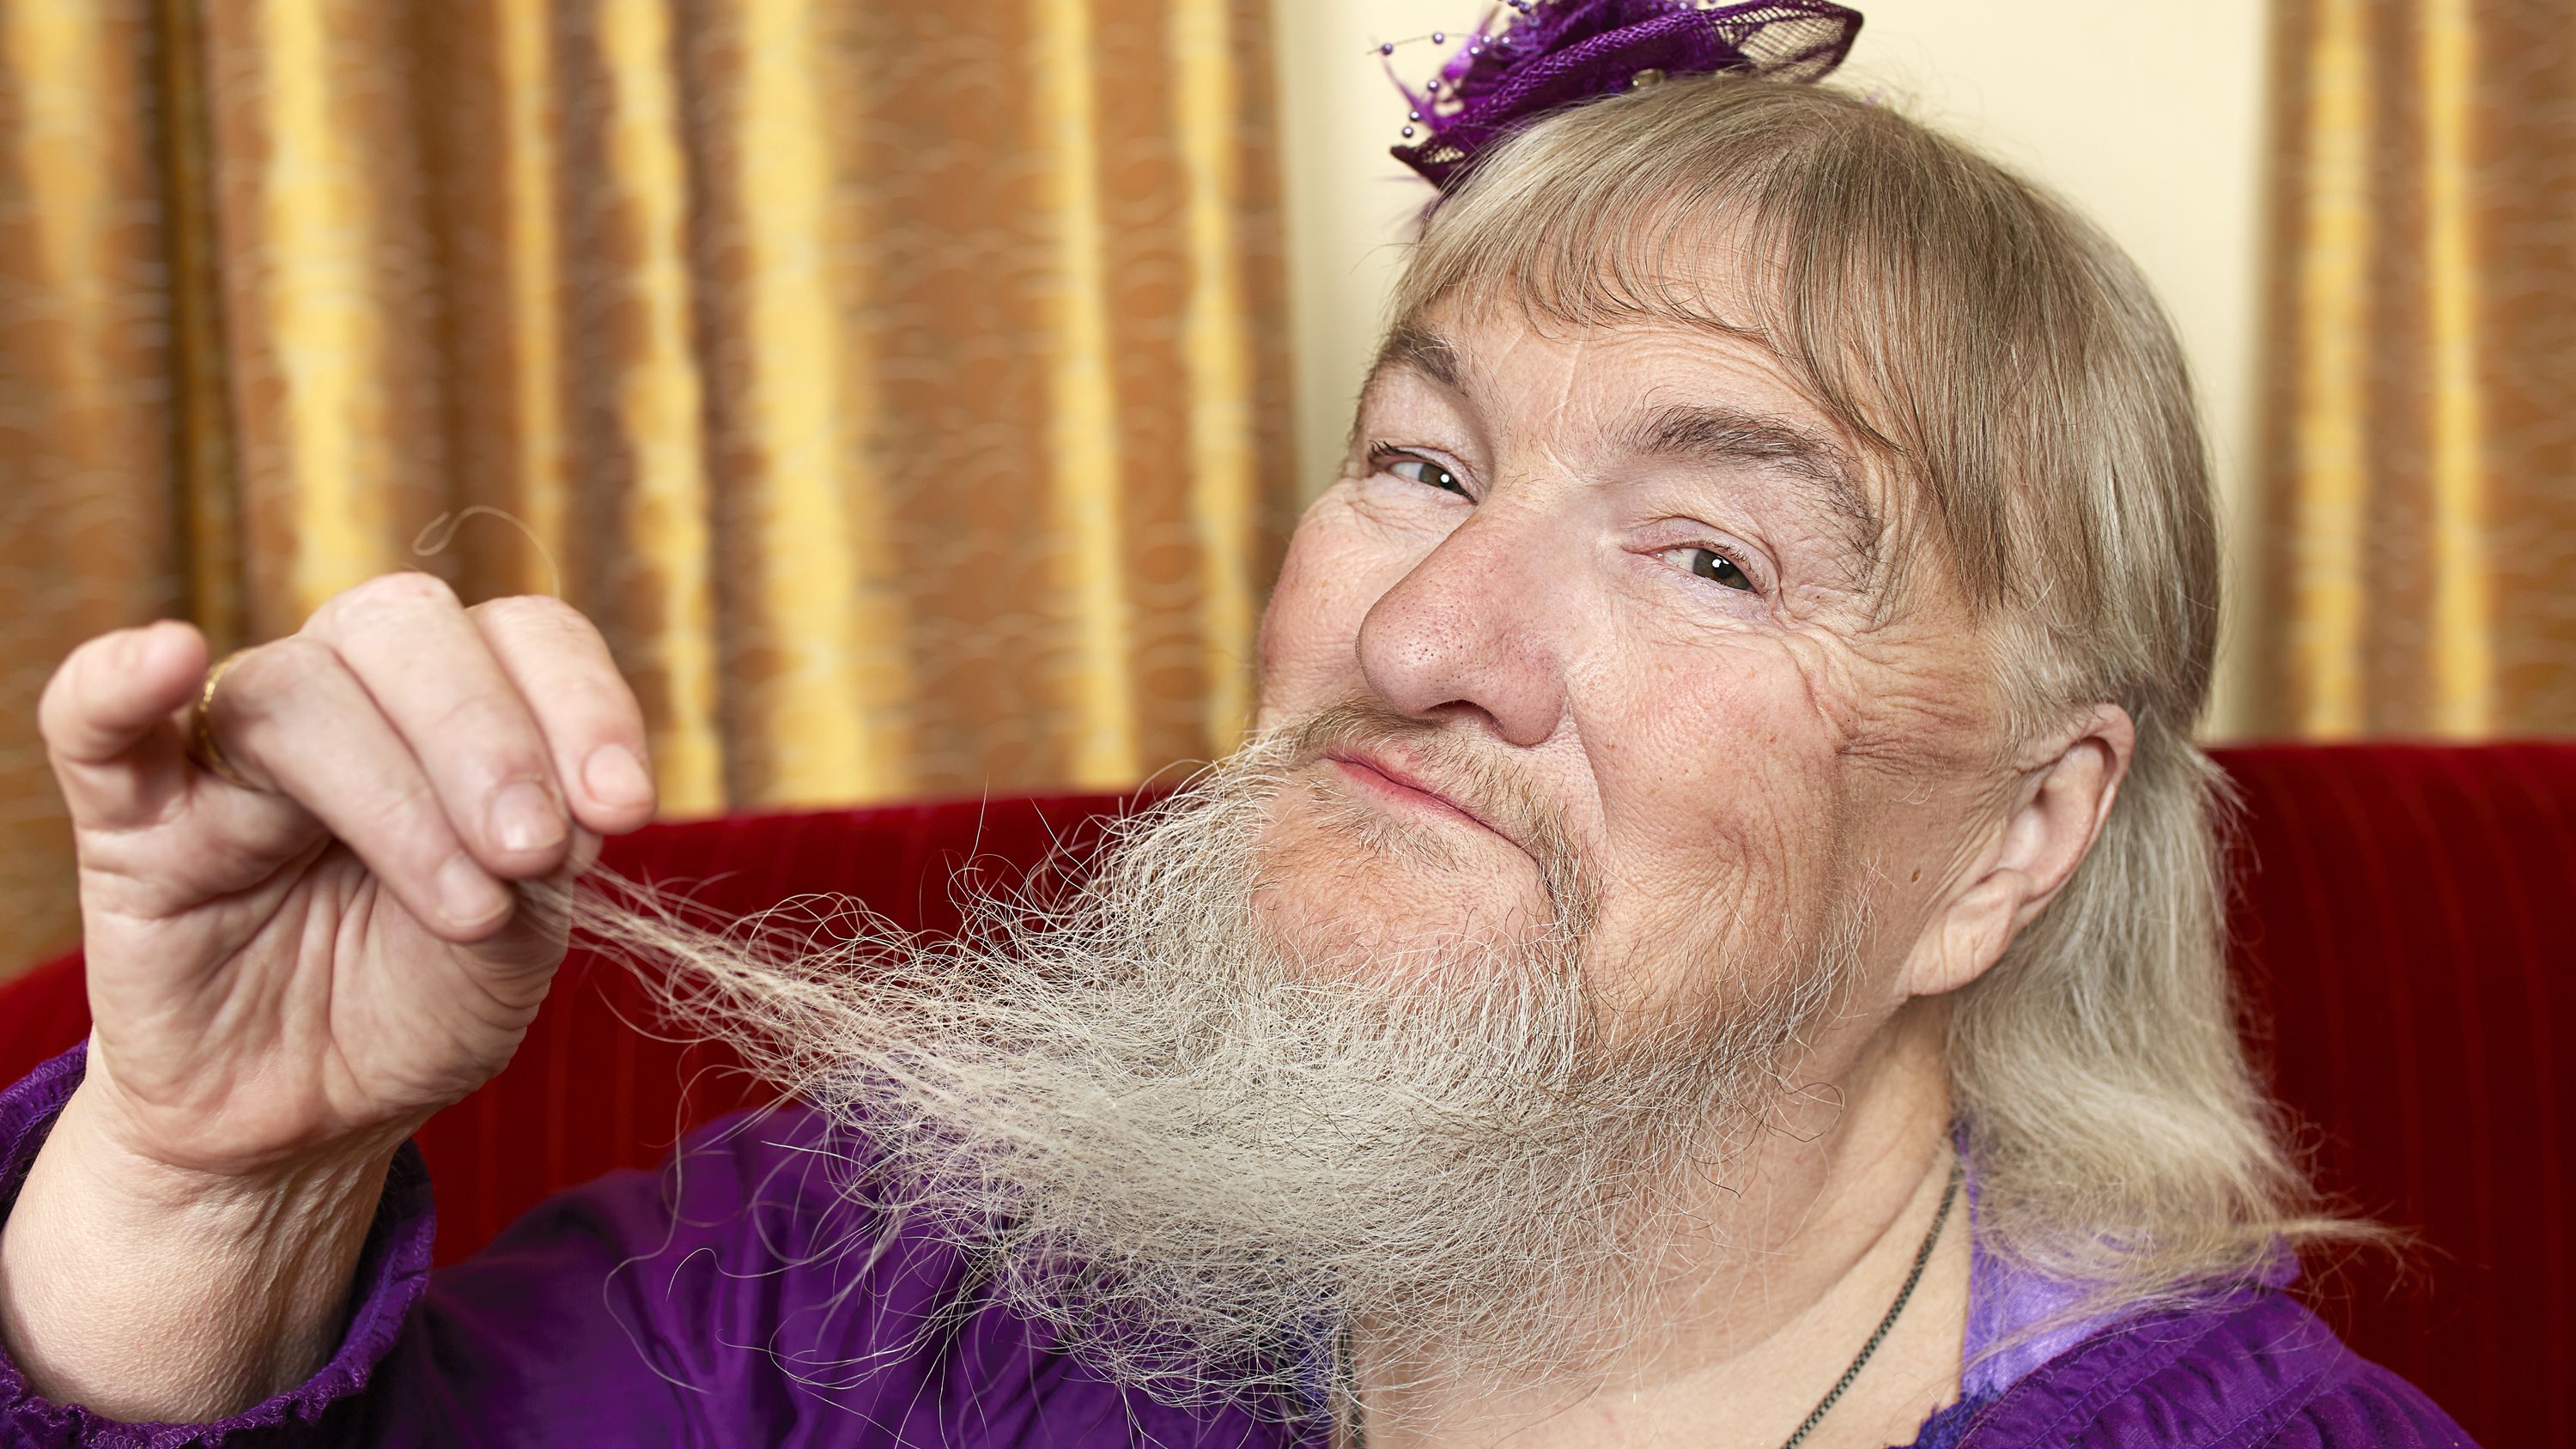 10. "The Longest Blonde Arm Hair in the World: Guinness World Record Holders" - wide 4